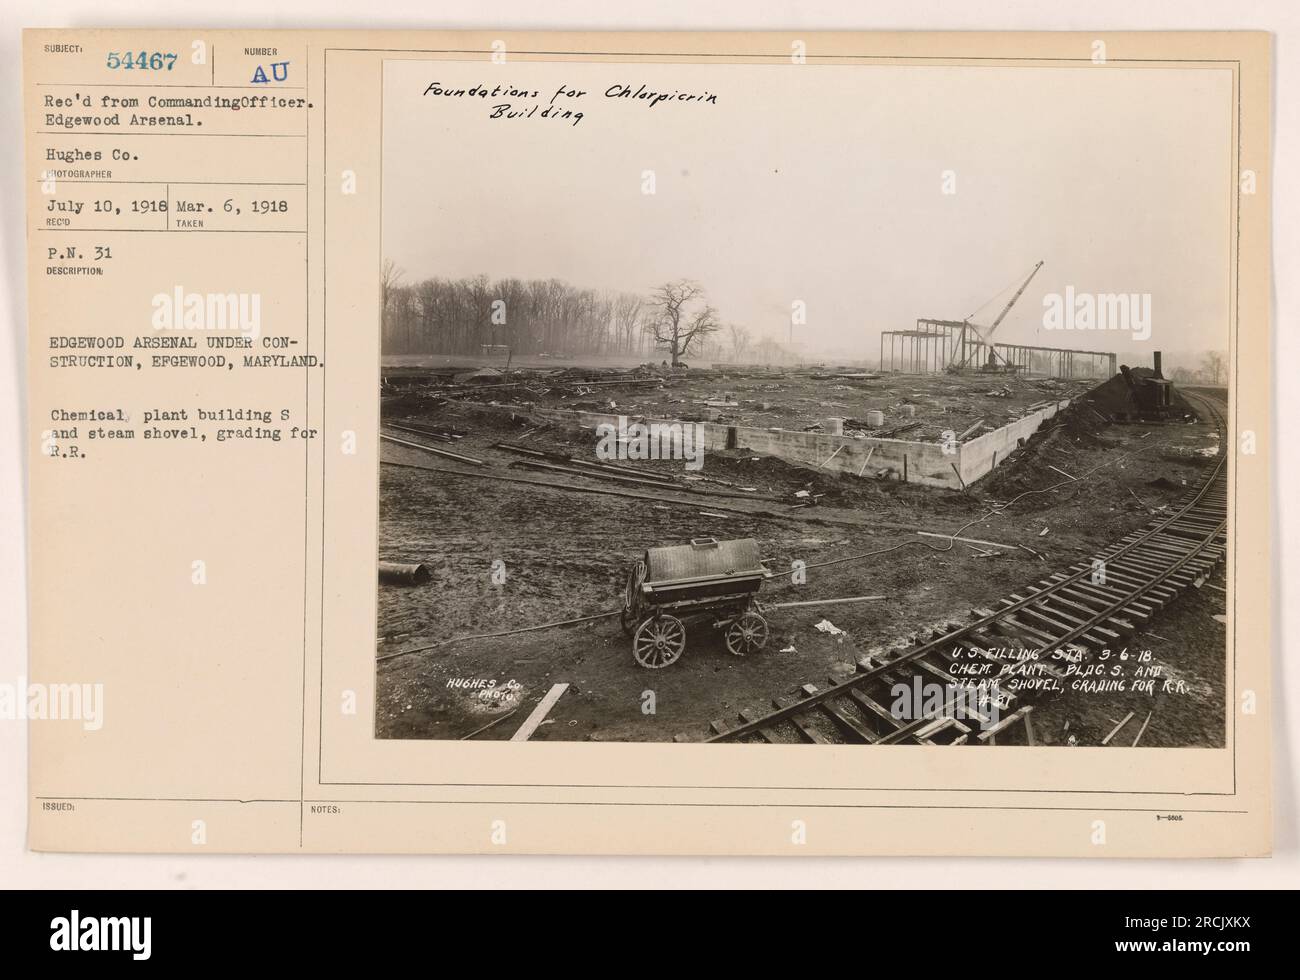 Construction of Edgewood Arsenal in Edgewood, Maryland. The image depicts a chemical plant building labeled 'S' and a steam shovel grading the area for railroad tracks. The photograph was taken on July 10, 1918, by Hughes Co. The foundations for the Chlorpicrin Building are noted. Stock Photo